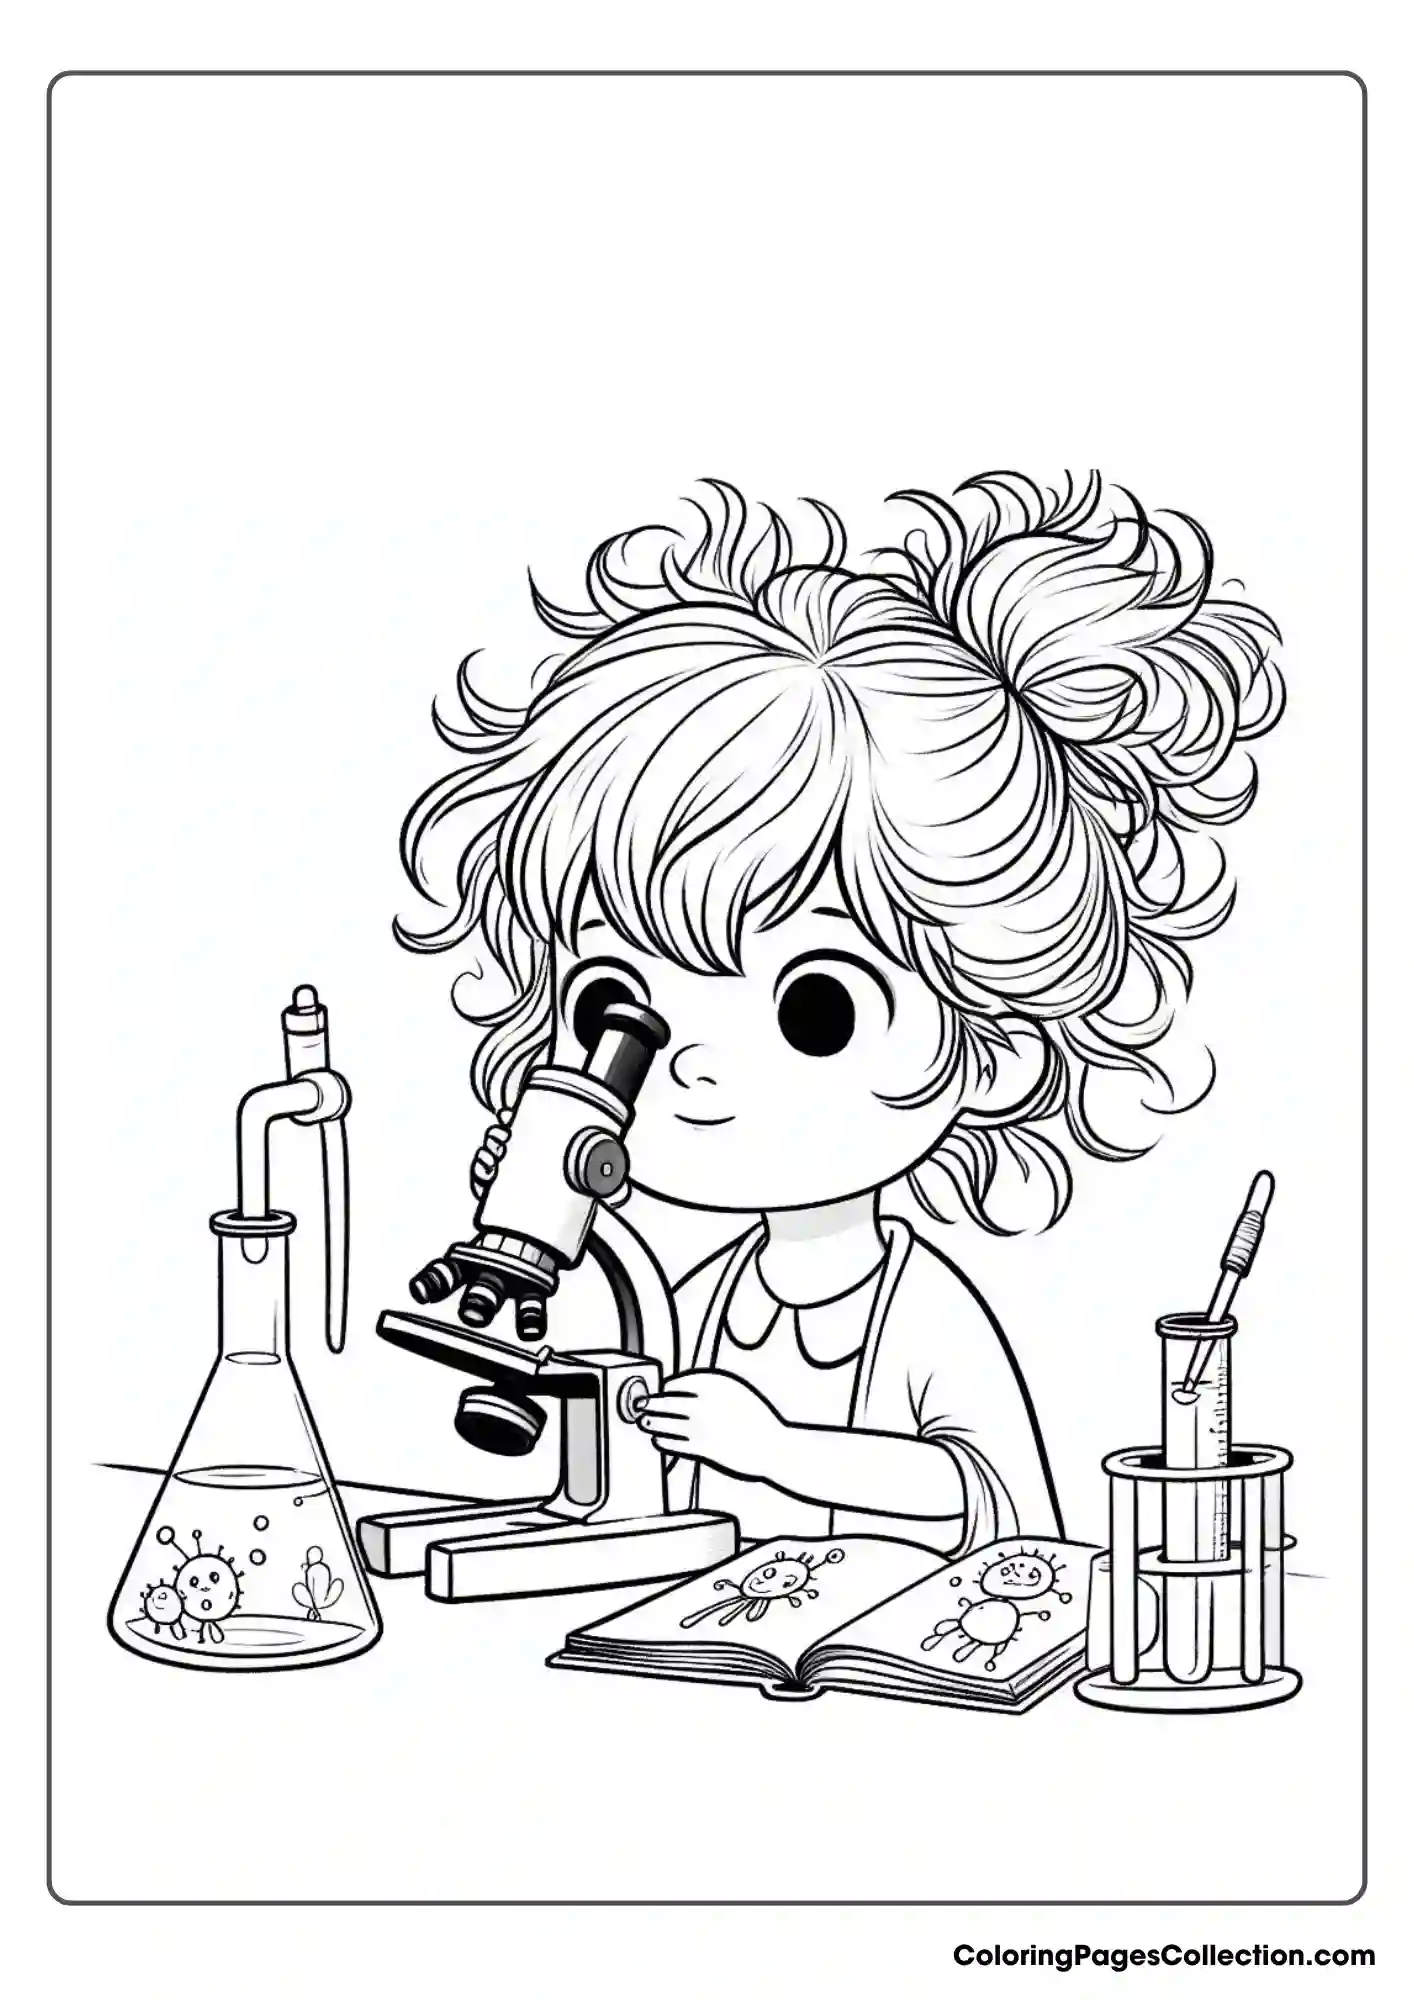 Coloring Page With A Little Girl In A Laboratory